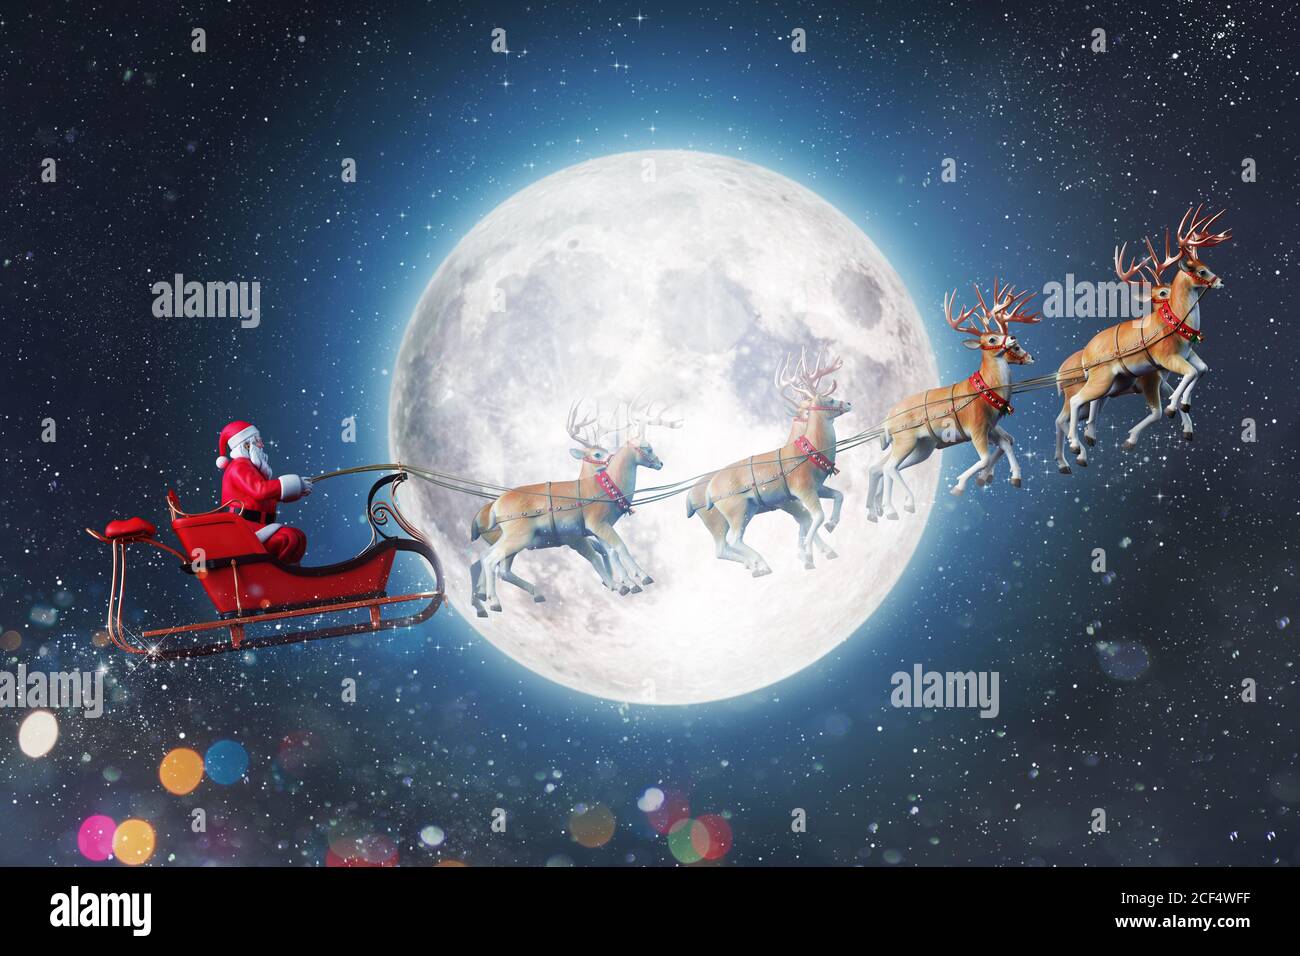 Santa claus in a sleigh ready to deliver presents with sleigh Stock Photo